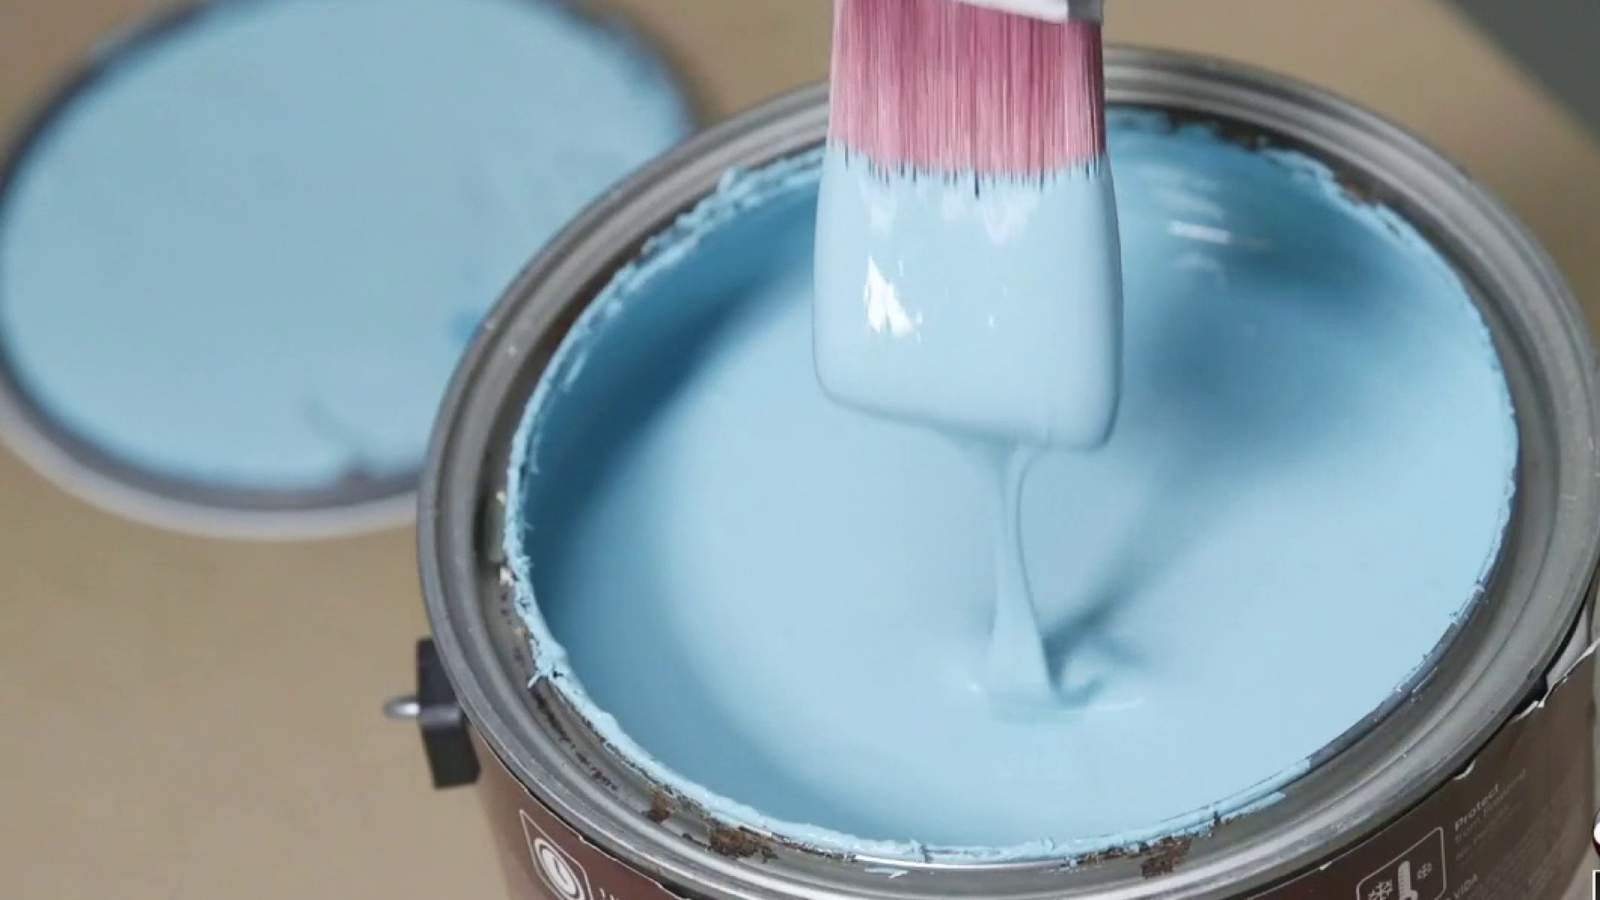 Painting pointers to get you started on your next DIY home improvement project